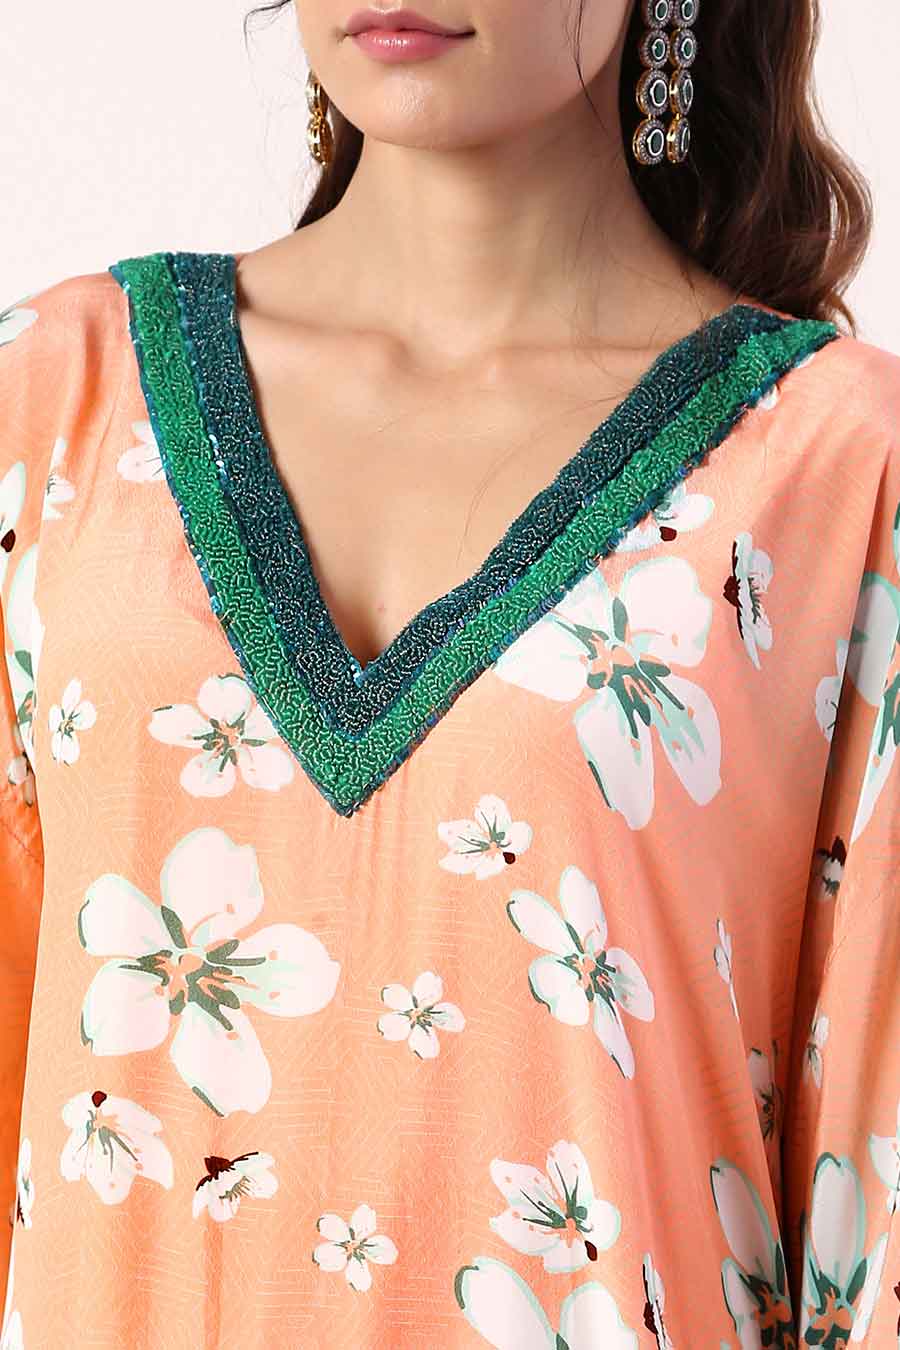 Coral Embroidered Kaftan Dress With Slip